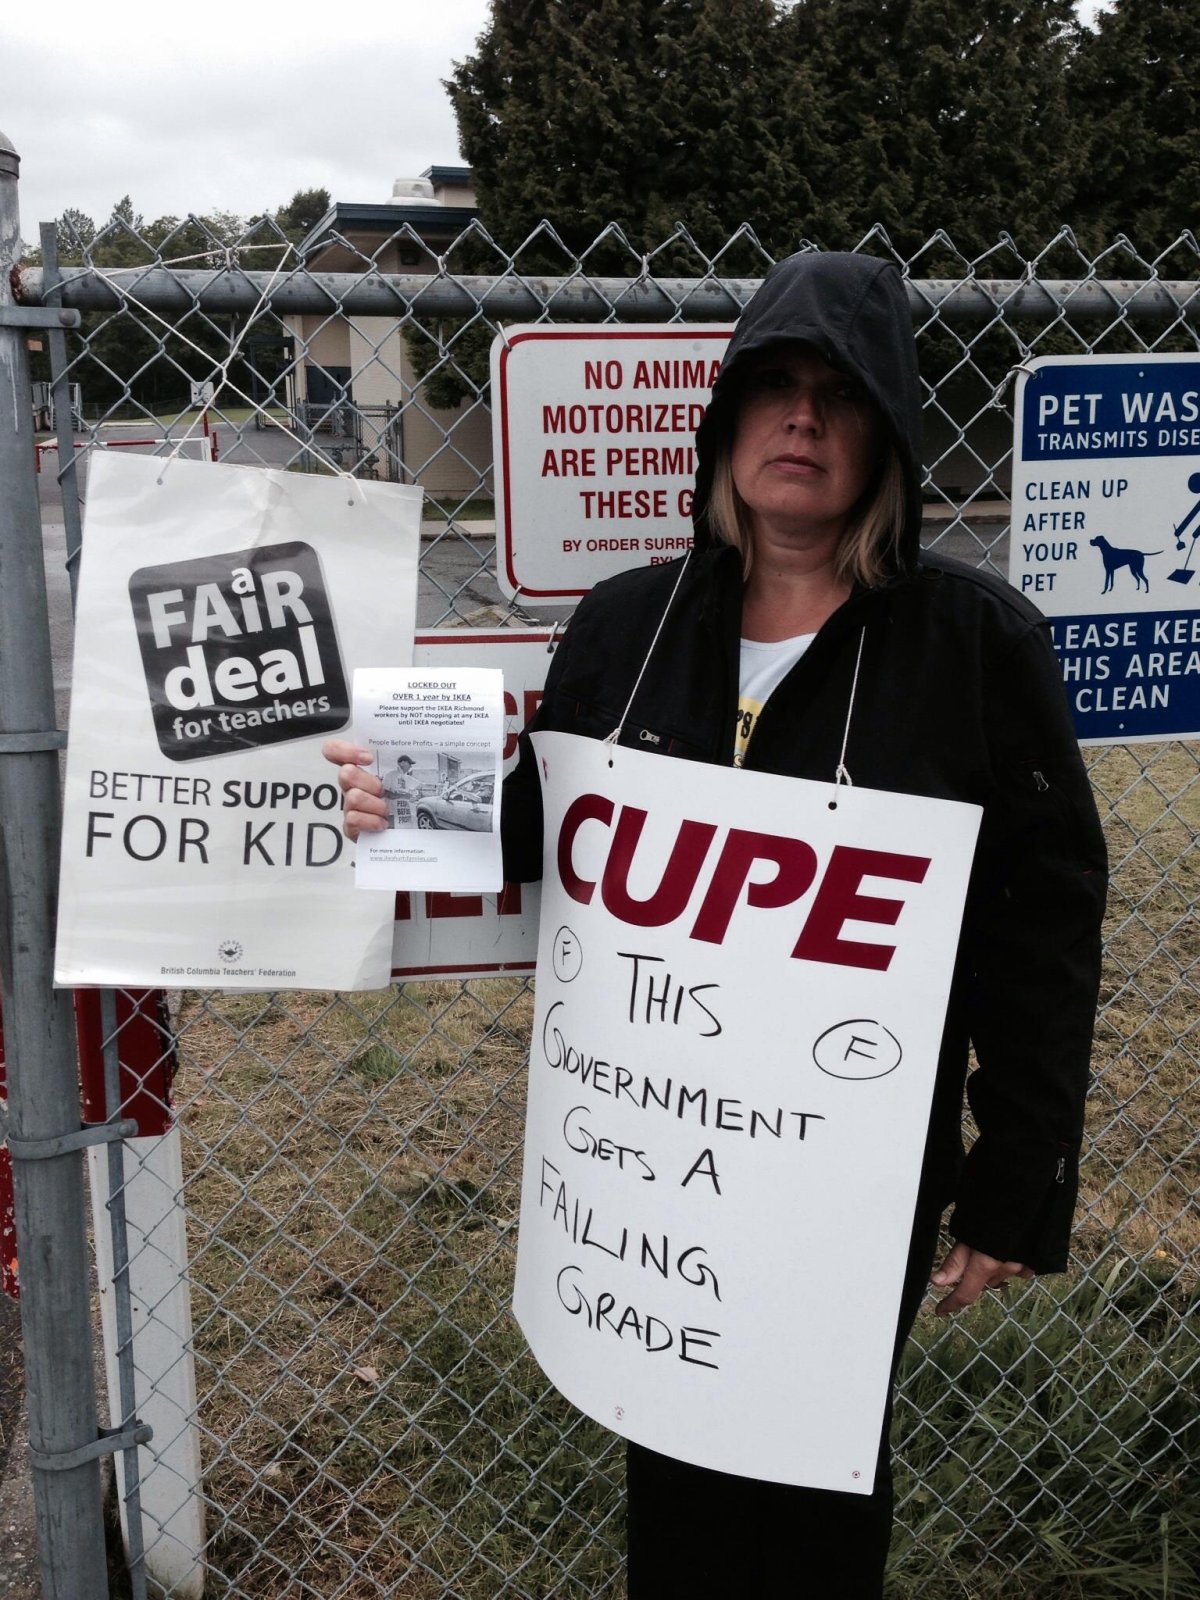 Lisa Snickars of Surrey has been on two picket lines in the last 24 hours.